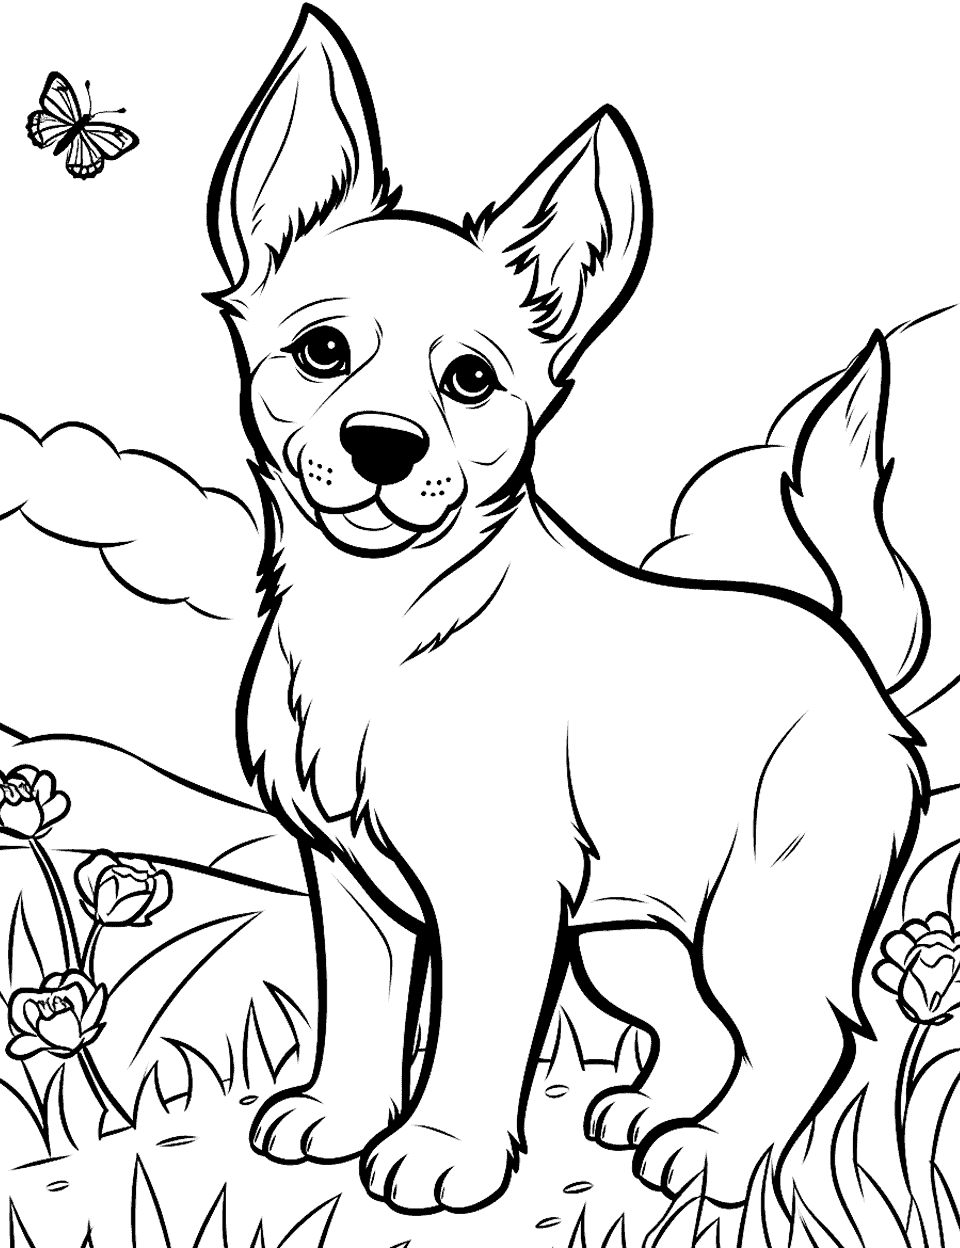 Puppy's Day Out German Shepherd in the Park Puppy Coloring Page - A German Shepherd puppy exploring the park, encountering butterflies and birds.